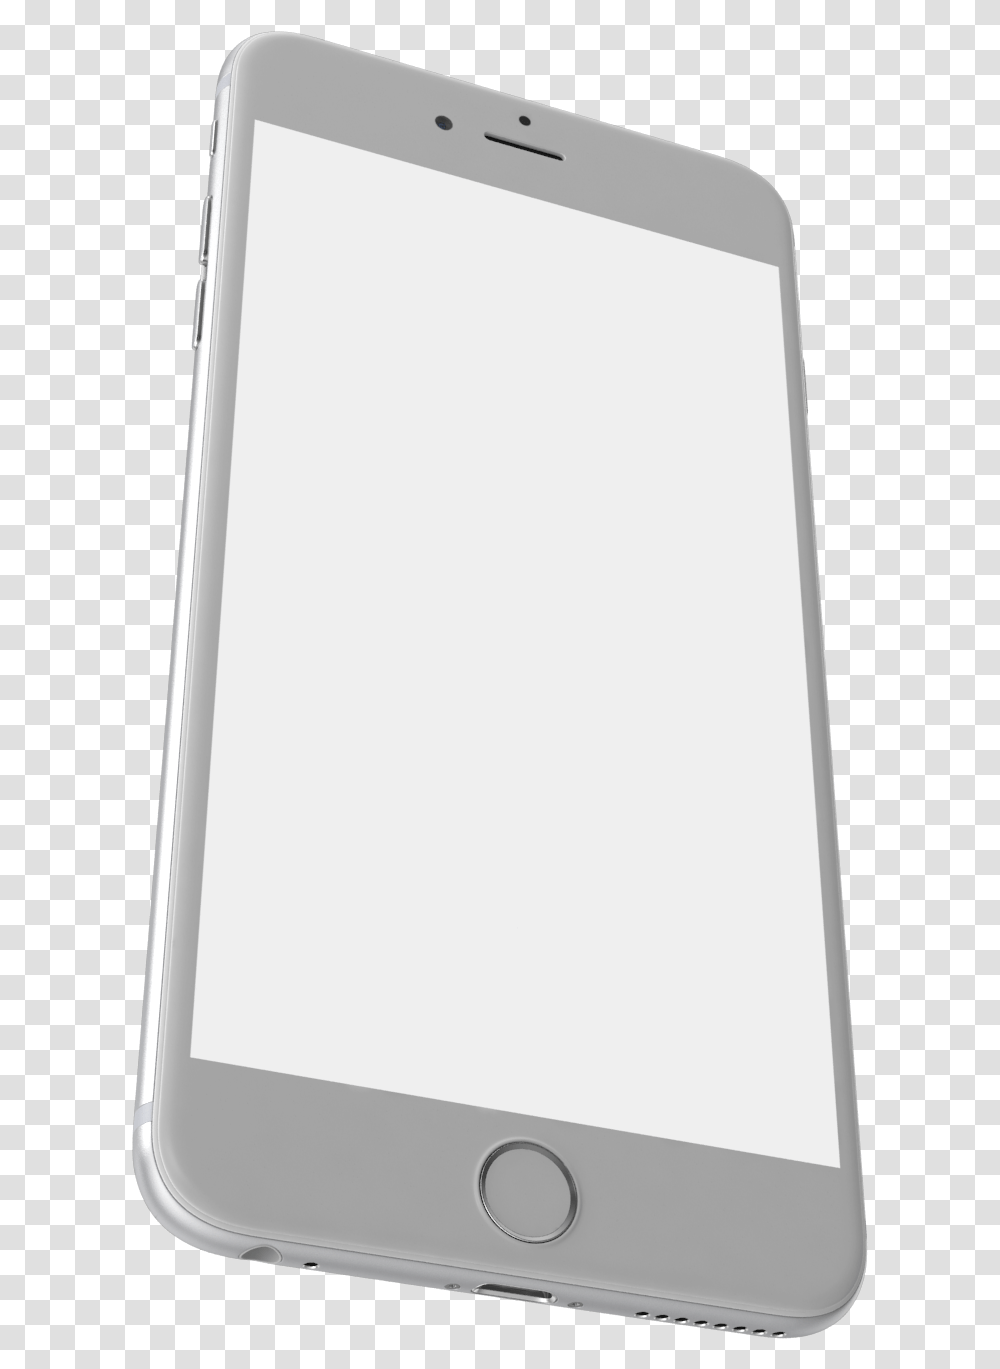 Iphone 6 Plus Silver Image Smartphone, Mobile Phone, Electronics, Cell Phone, Mirror Transparent Png